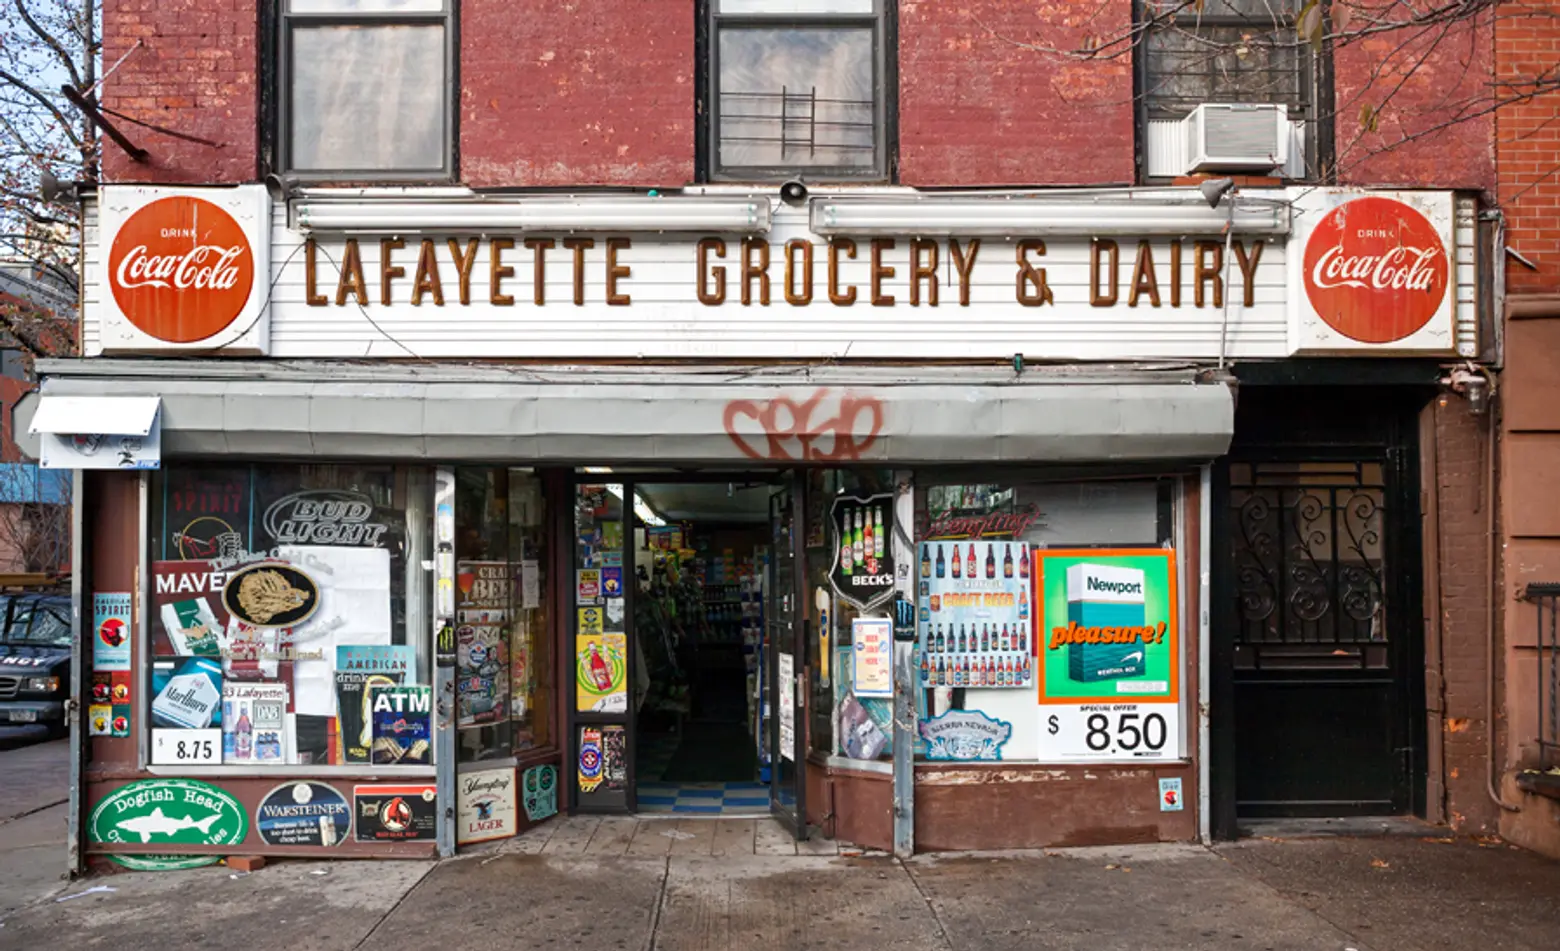 Lafayette Grocery & Dairy, Privilege Signs, James and Karla Murray, disappearing storefronts, NYC mom and pops